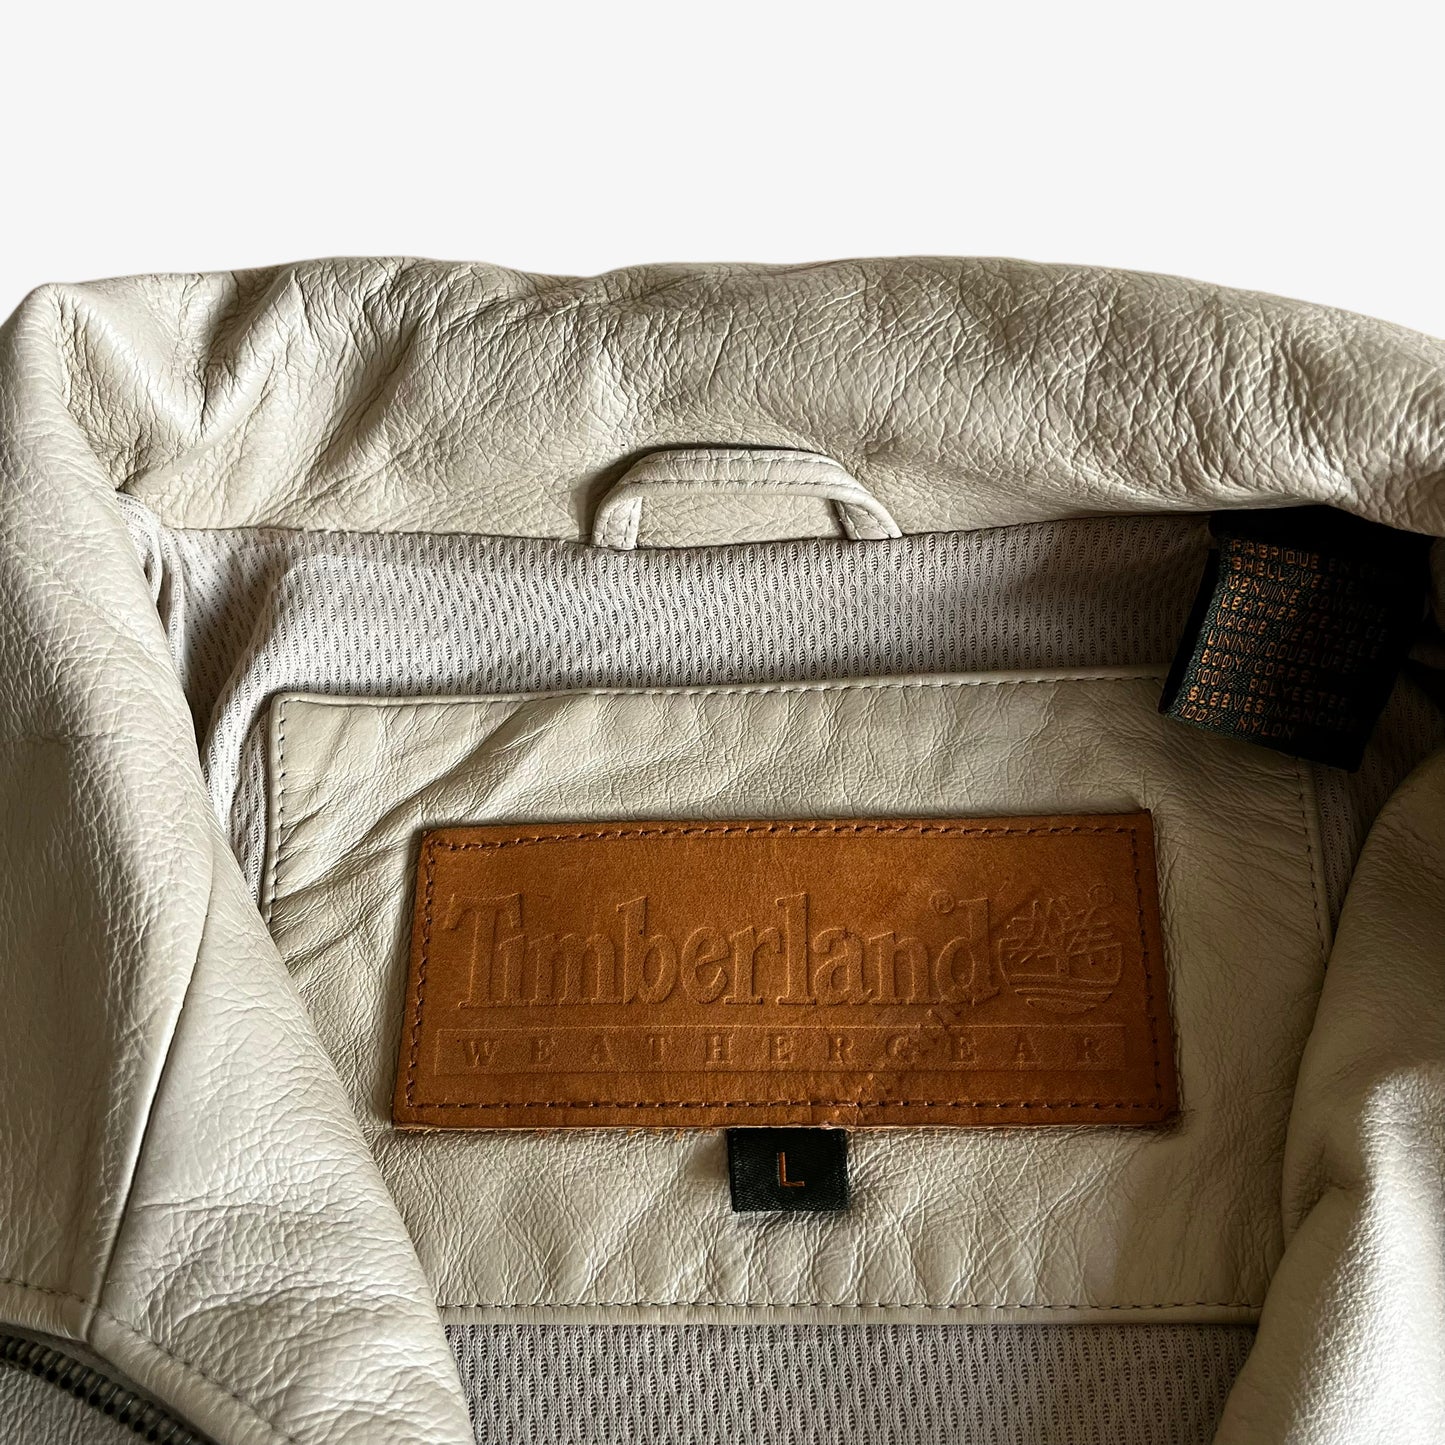 Vintage 90s Timberland Cream Leather Driving Jacket Label - Casspios Dream